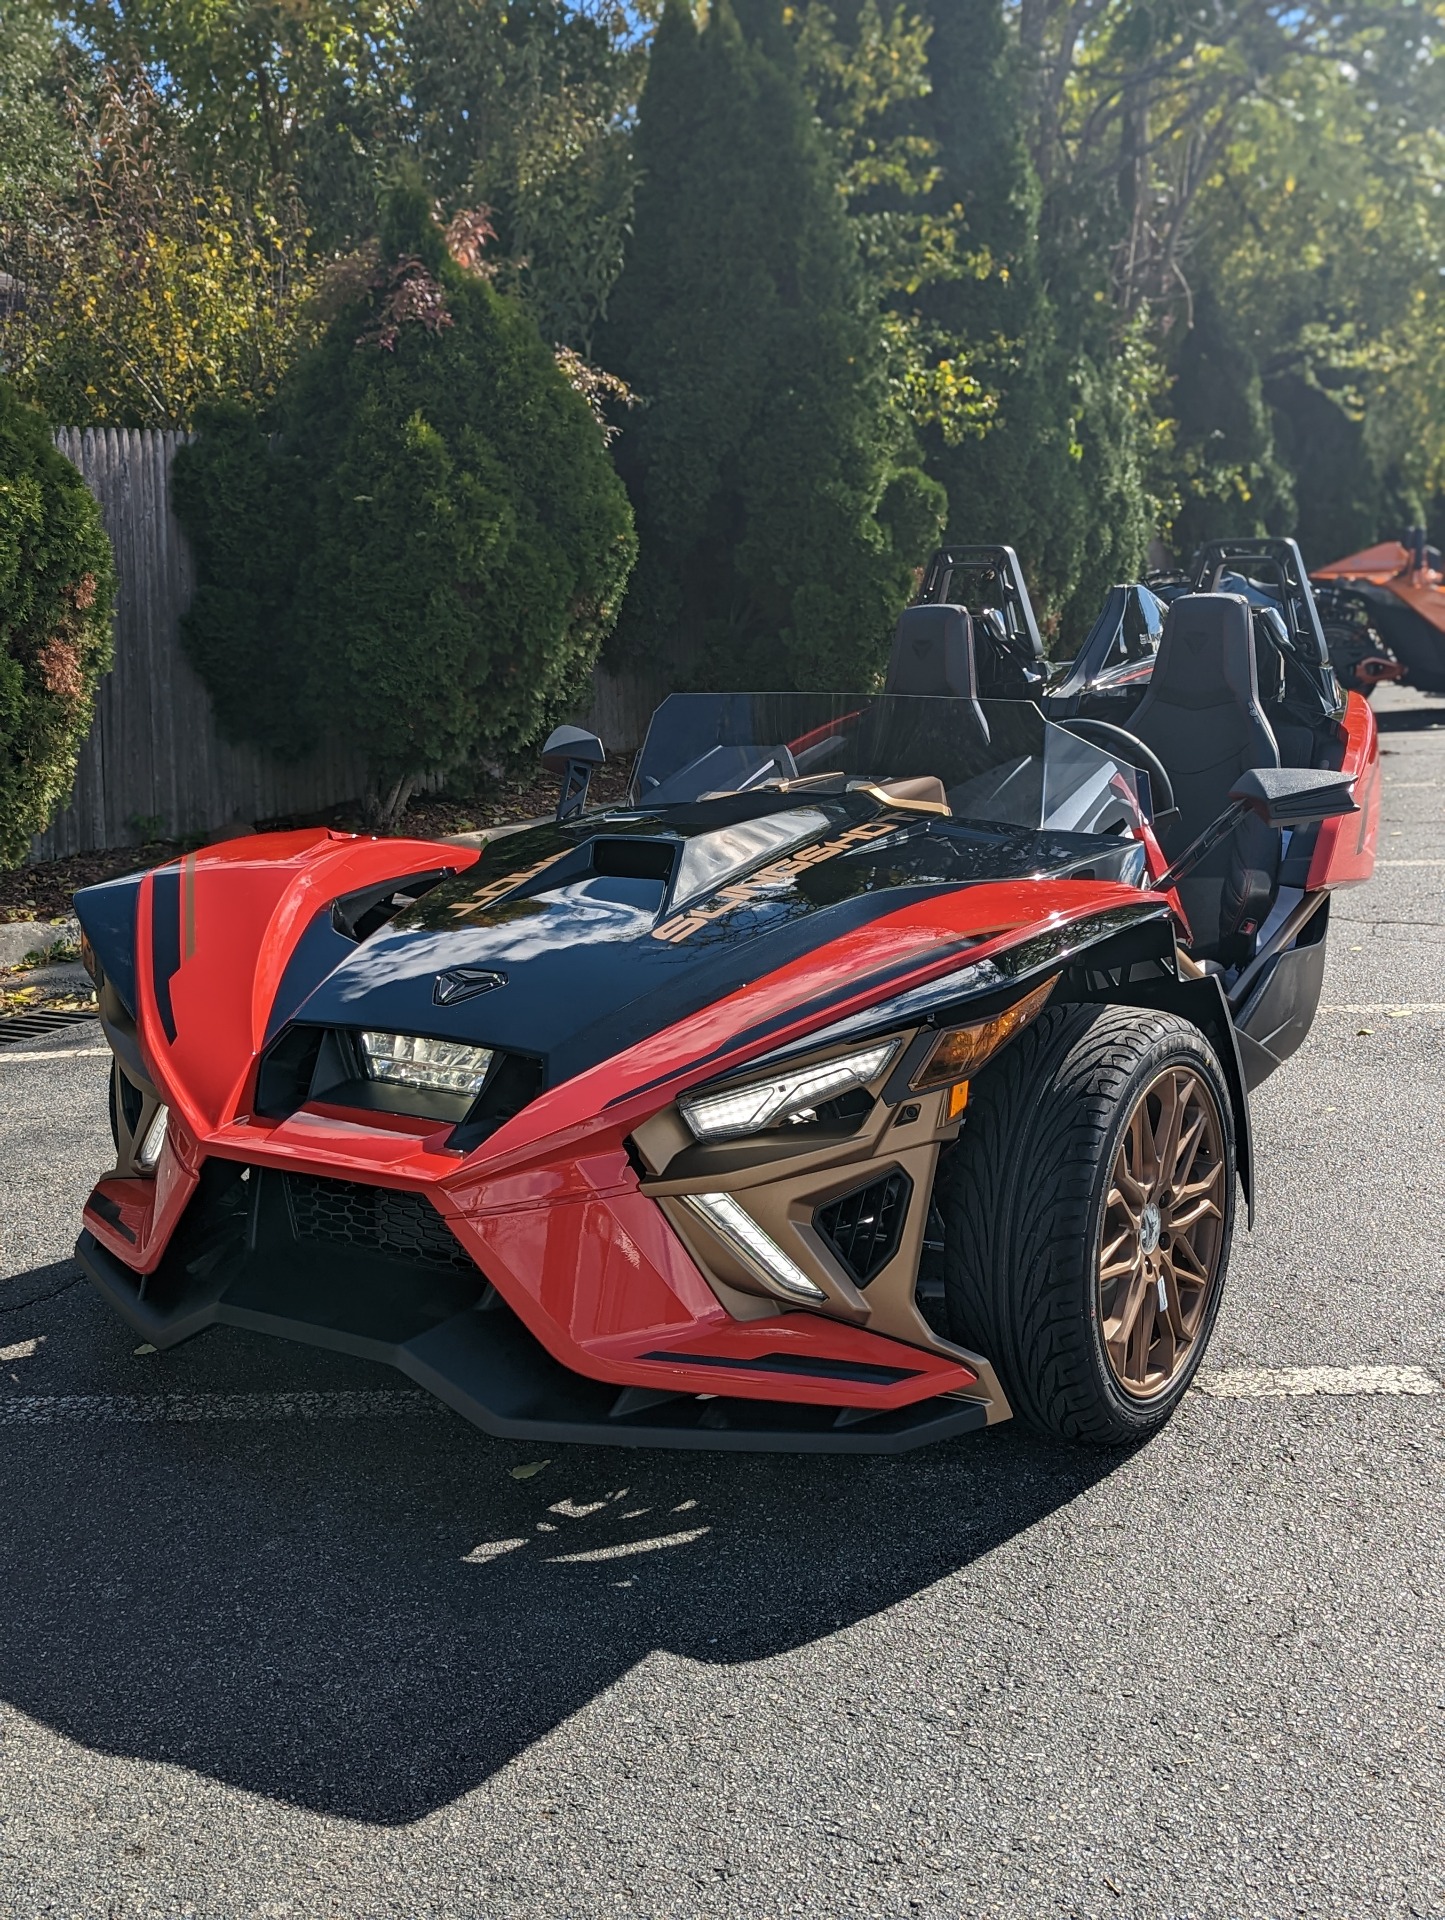 2022 Slingshot Signature Limited Edition AutoDrive in Mahwah, New Jersey - Photo 5